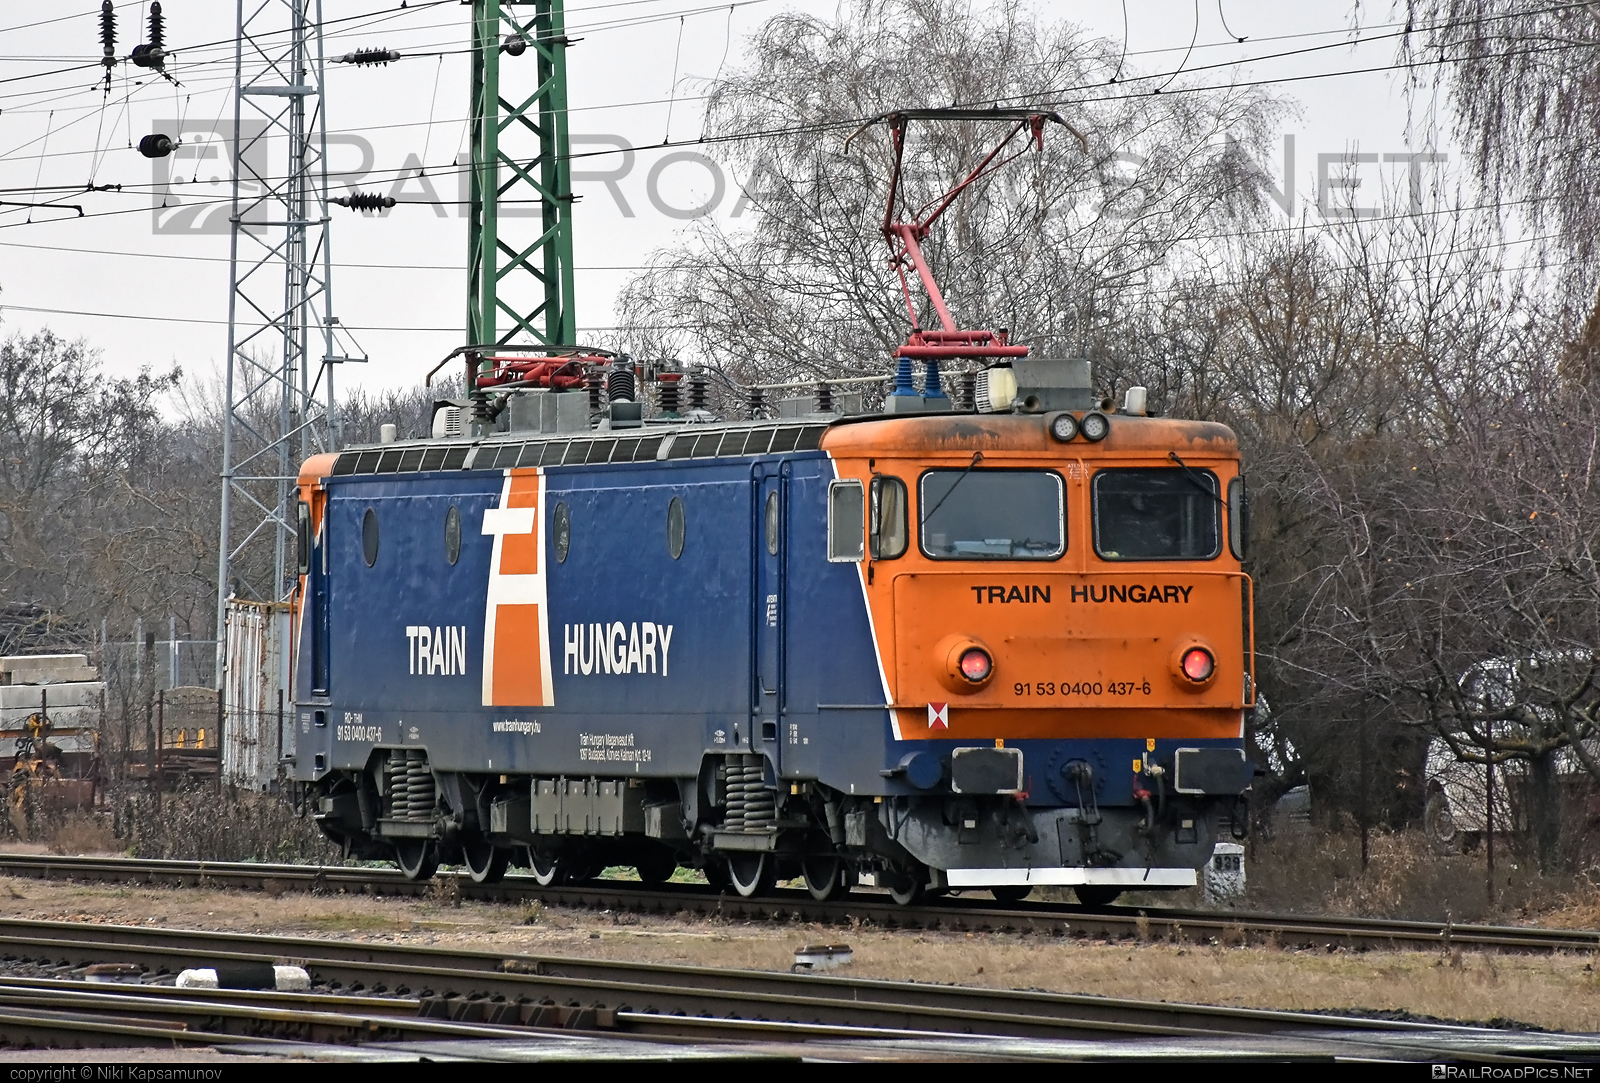 Electroputere LE 5100 - 0400 437-6 operated by Train Hungary Magánvasút Kft #electroputere #electroputerecraiova #electroputerele5100 #le5100 #trainhungary